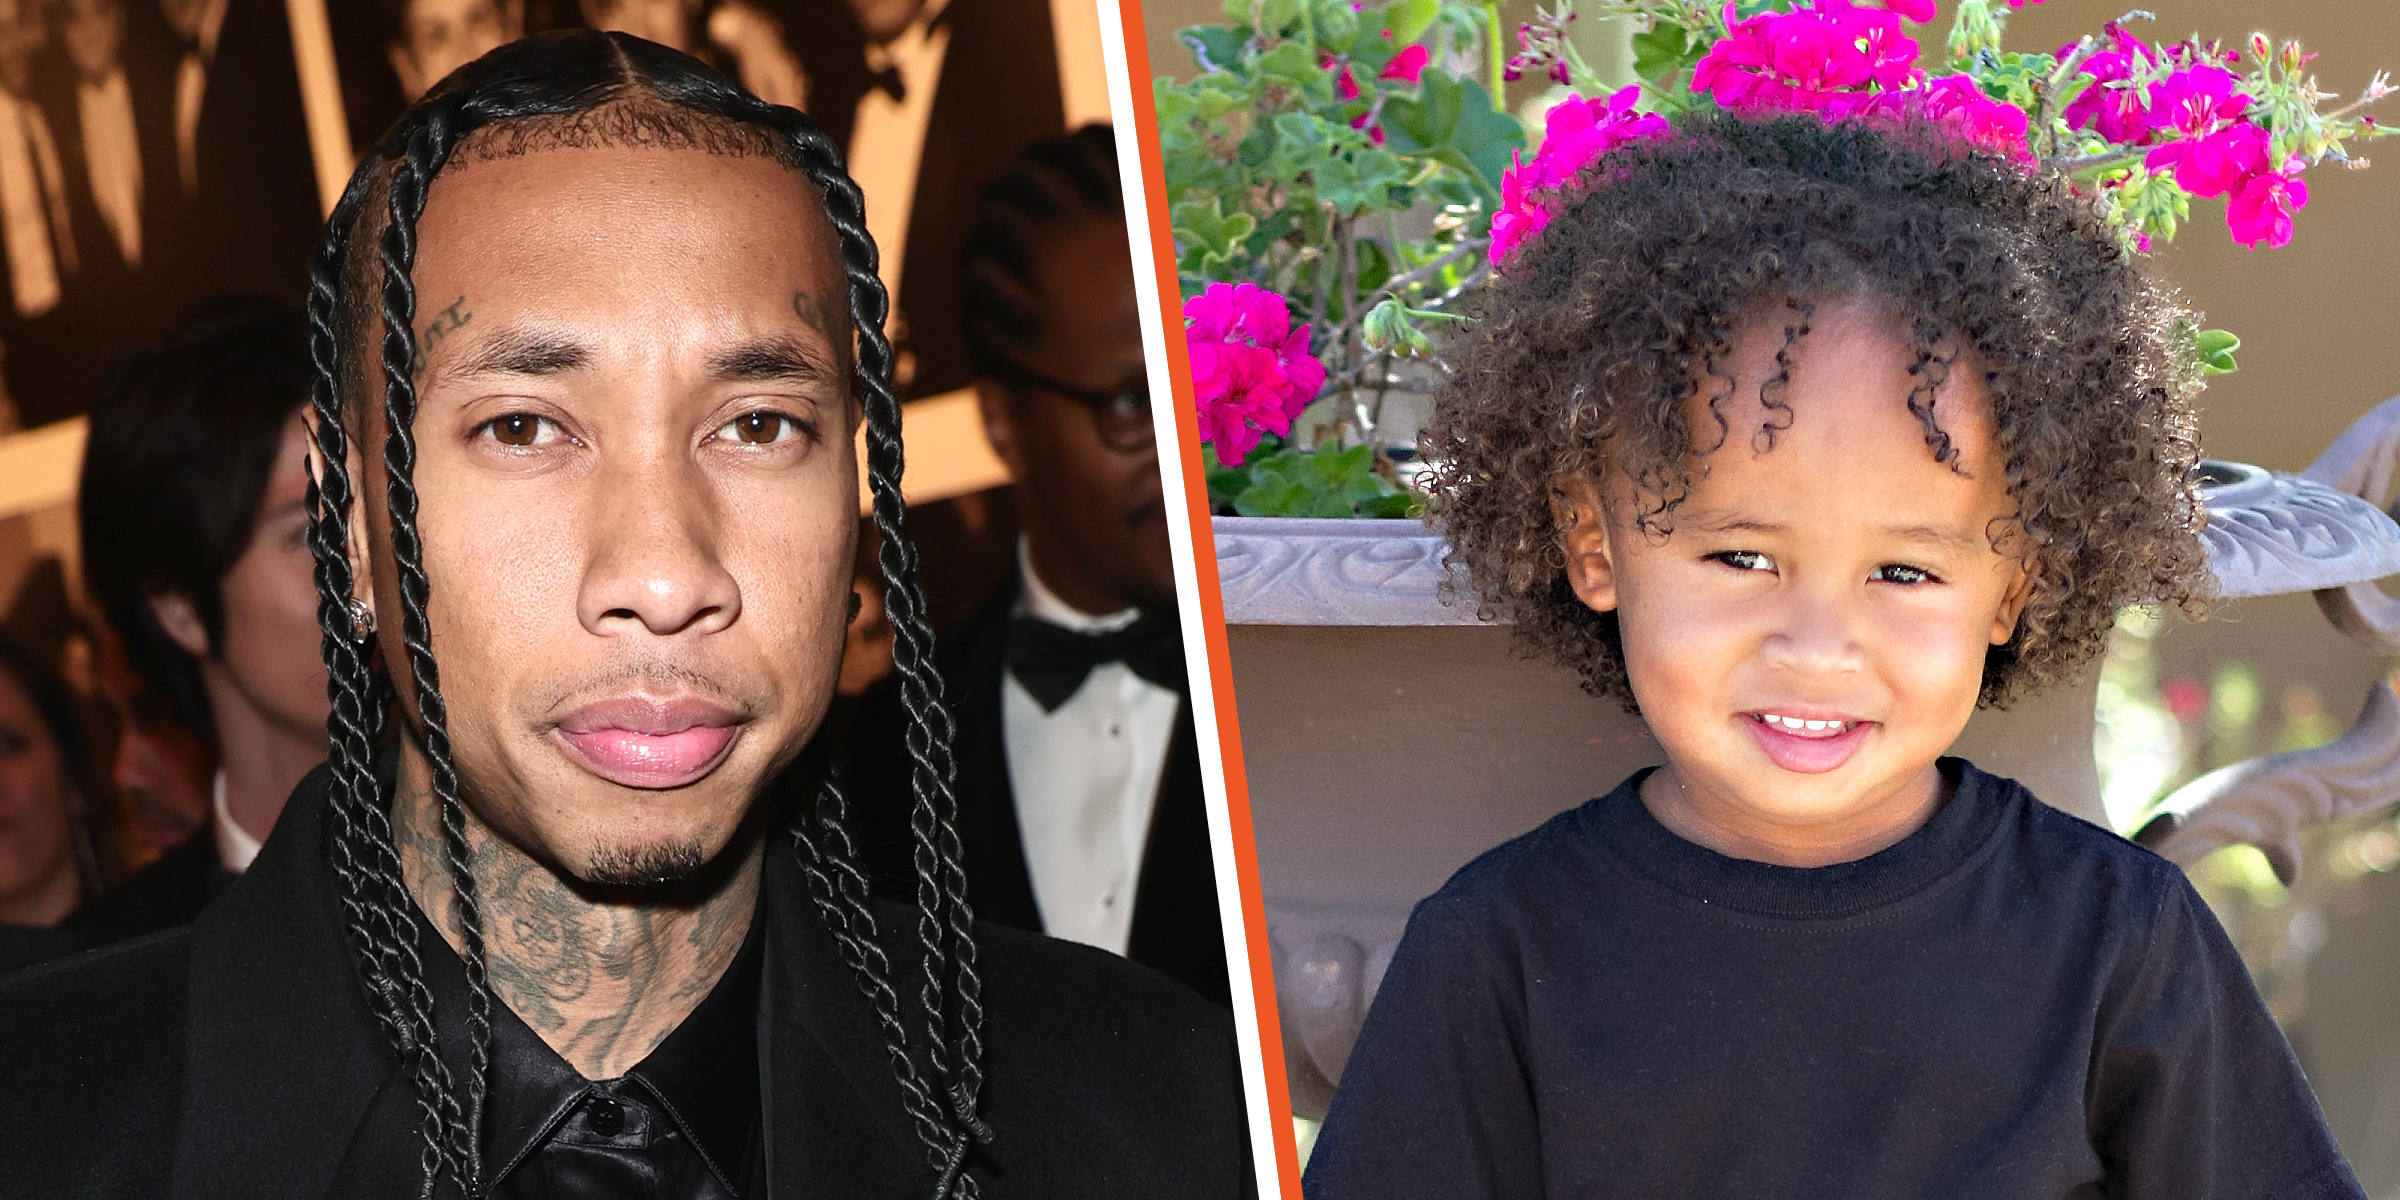 Tyga | King Cairo | Source: Getty Images